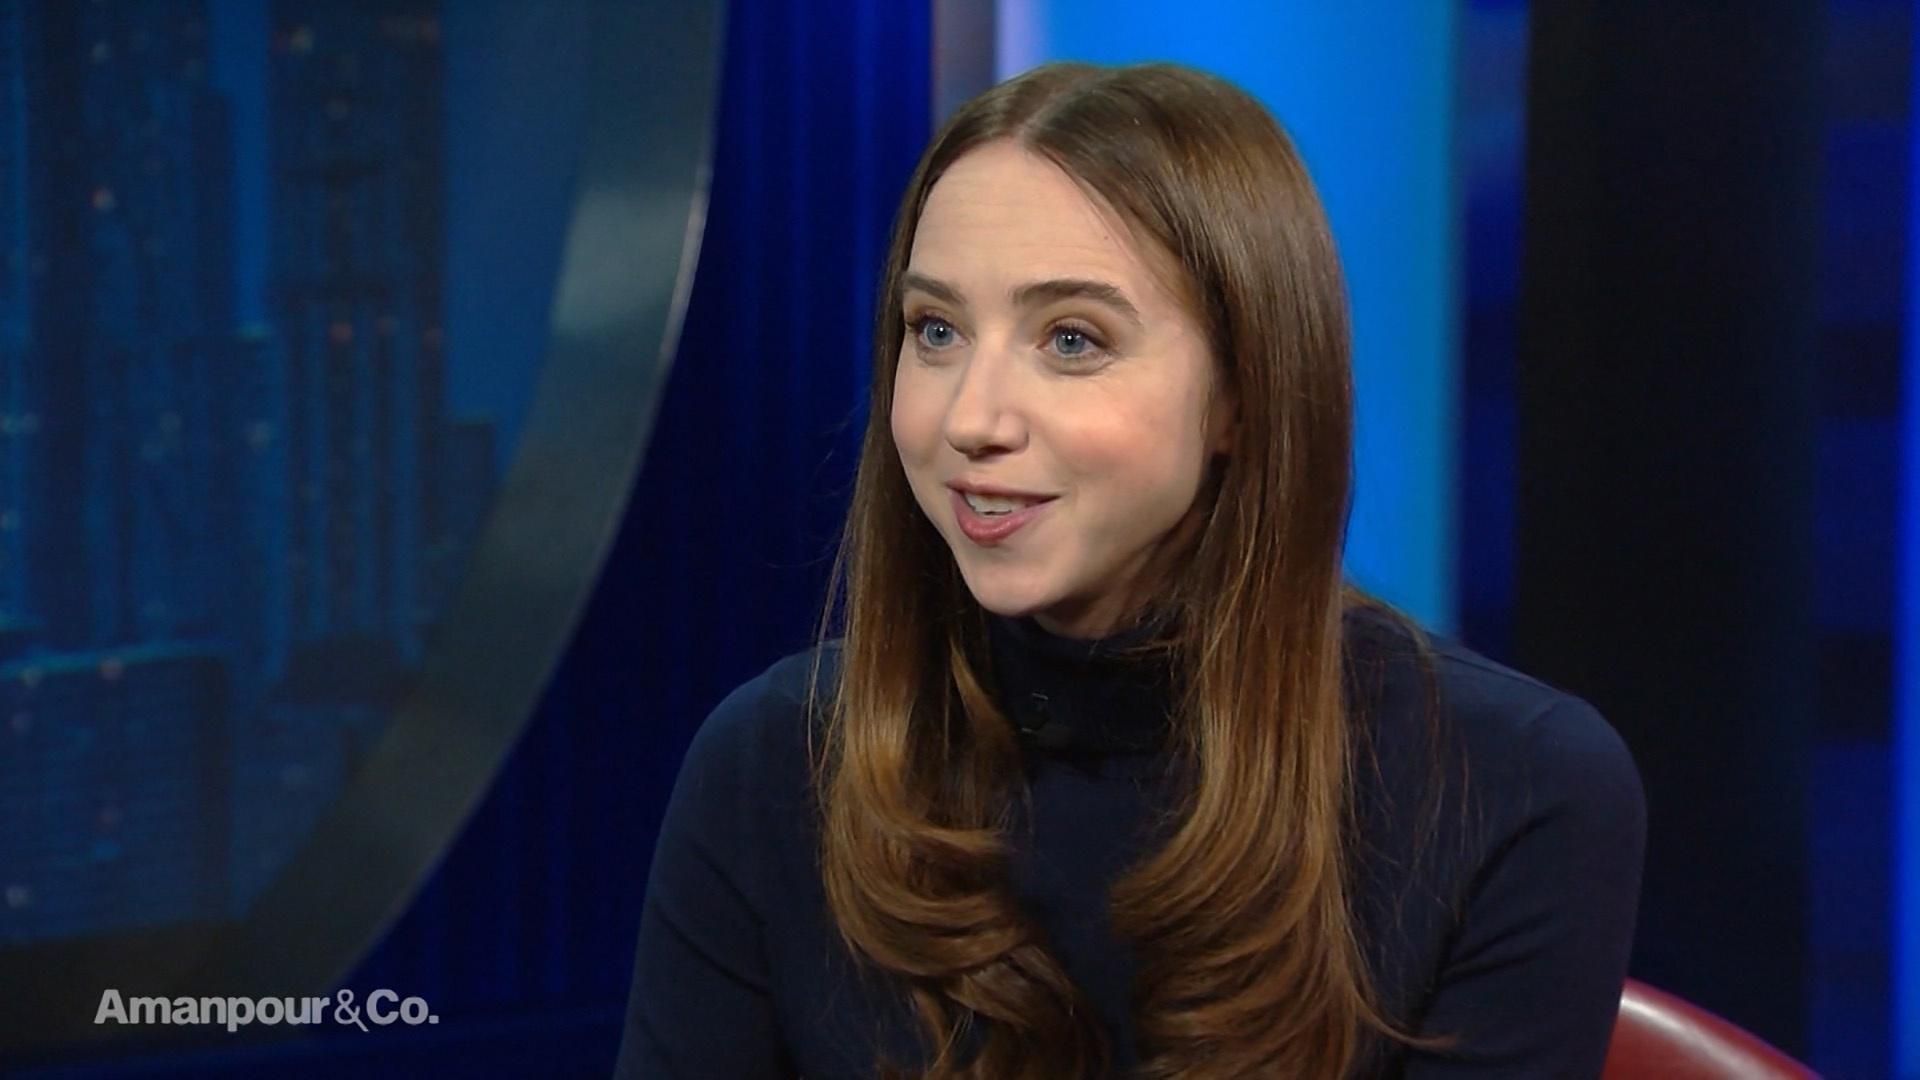 Actress & Writer Zoe Kazan on Her Career on Stage and Screen